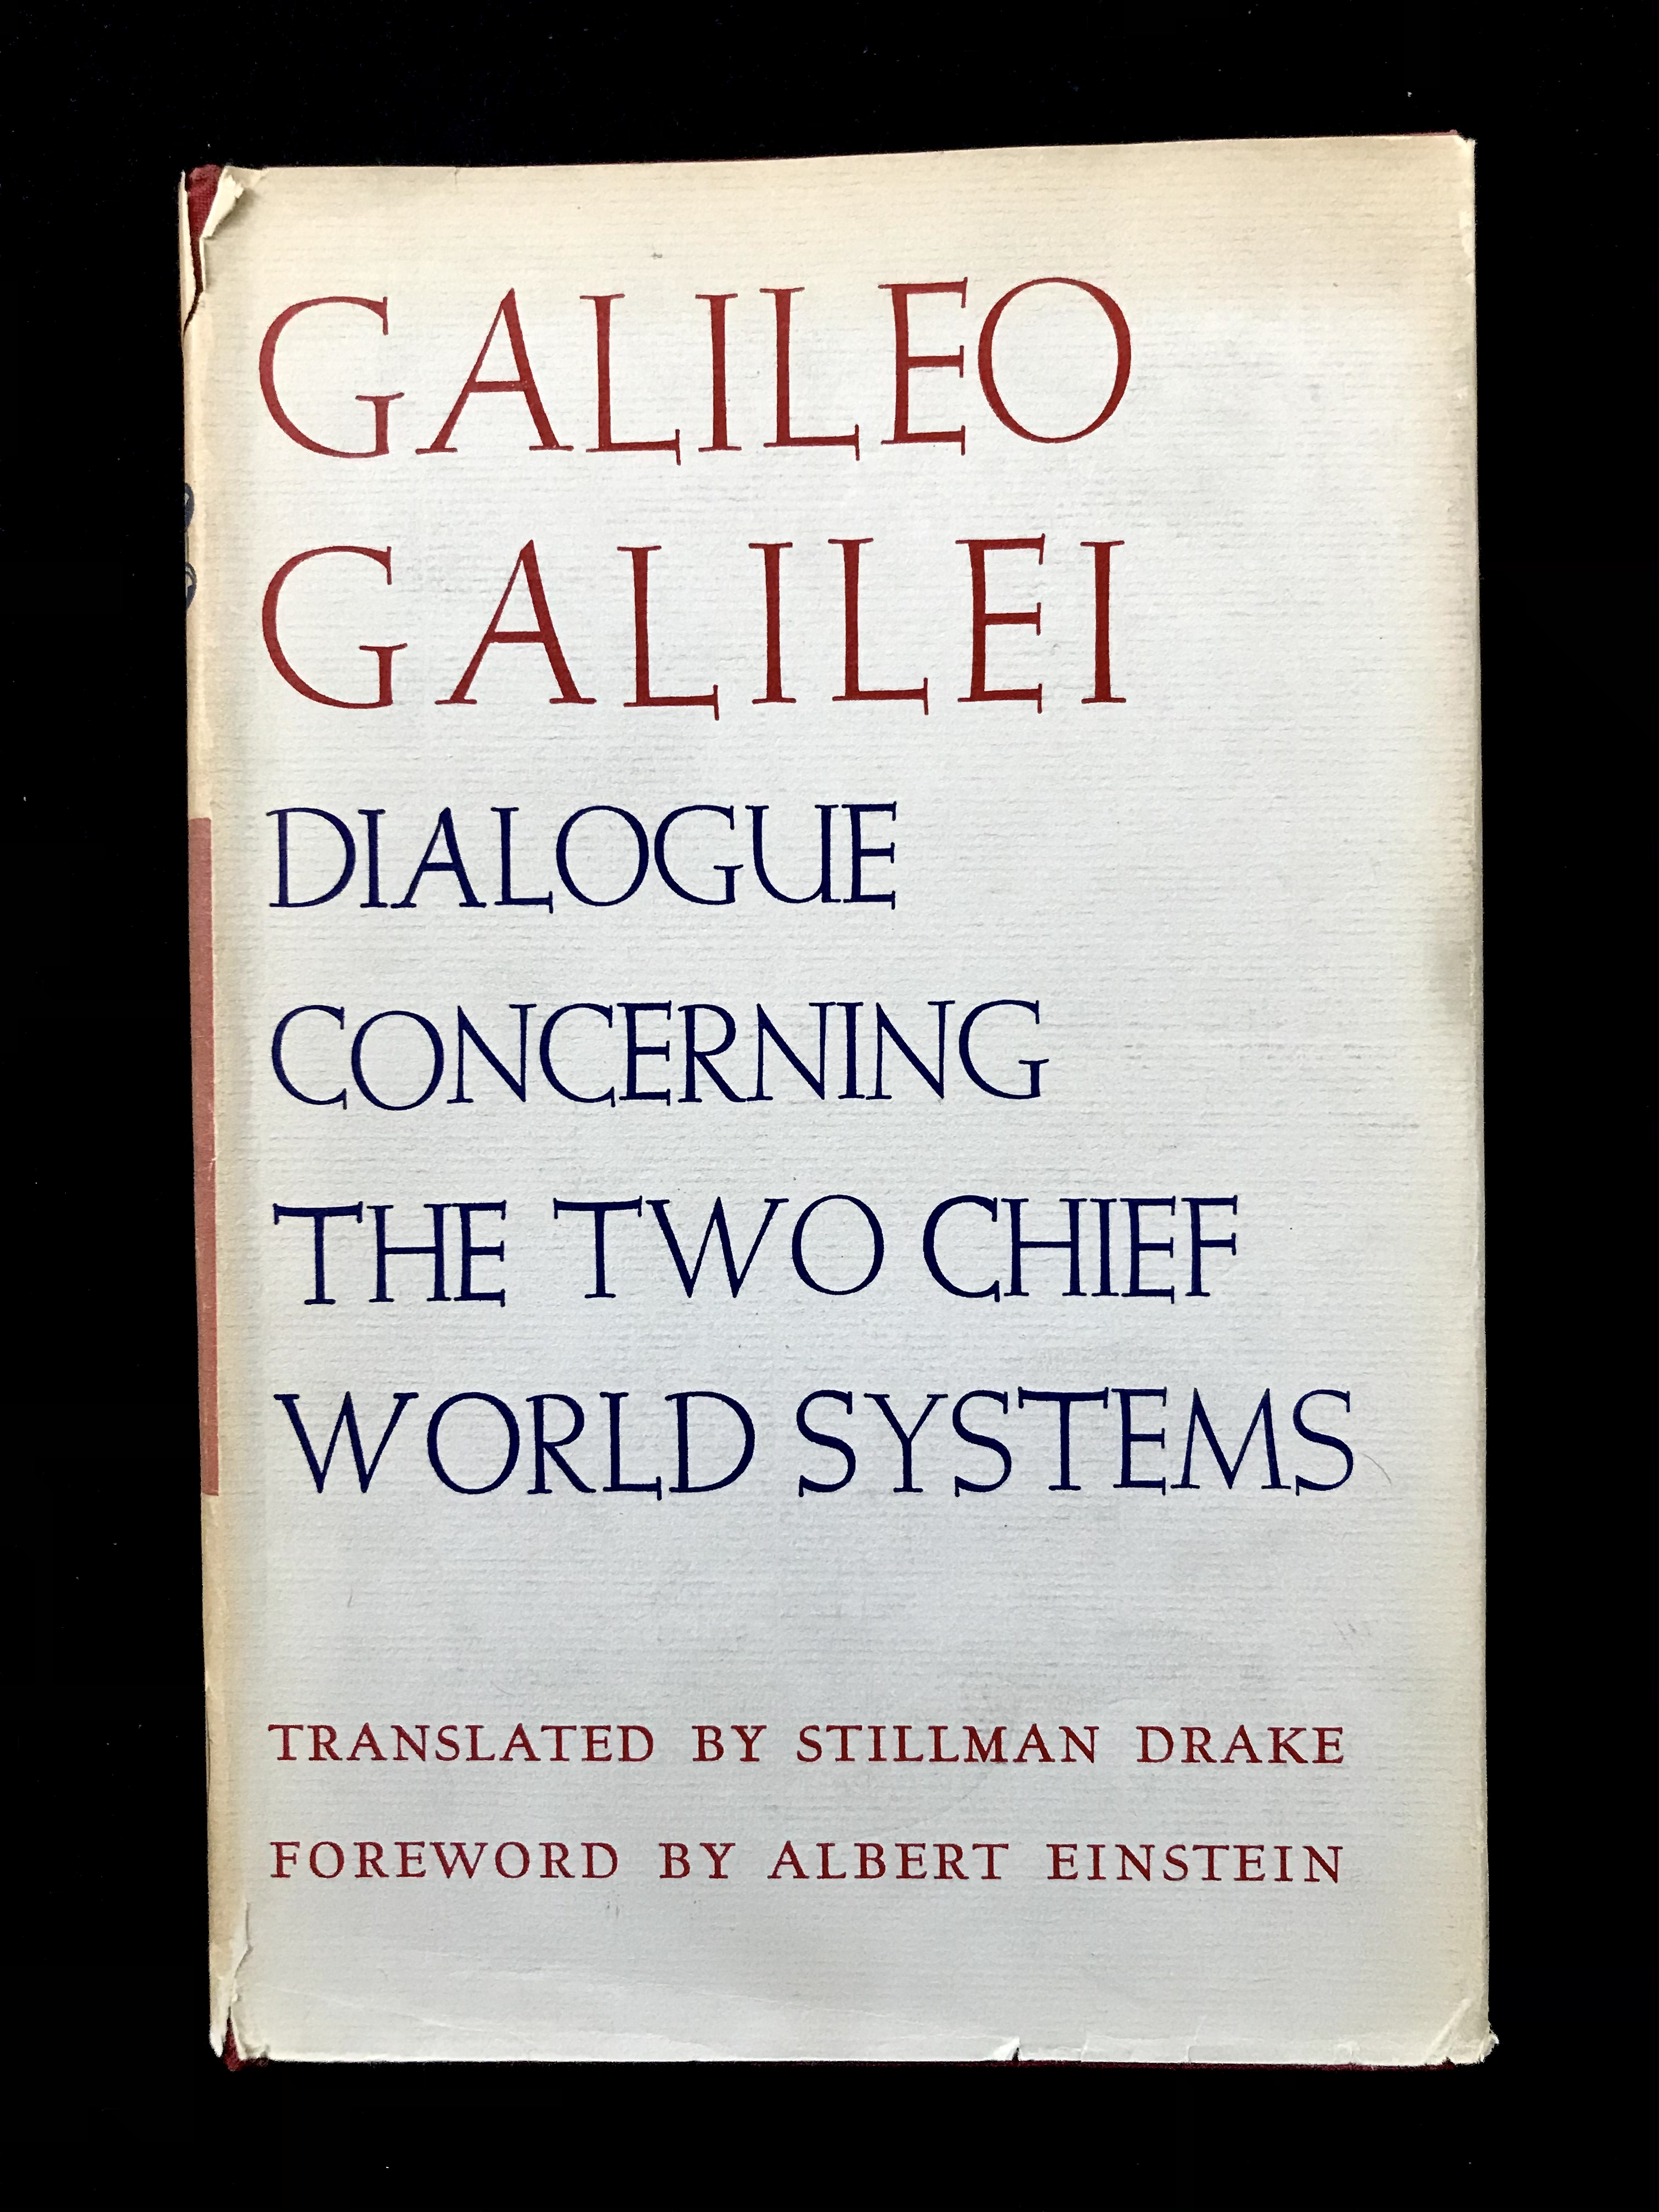 Dialogue Concerning The Two Chief World Systems by Galileo Galilei